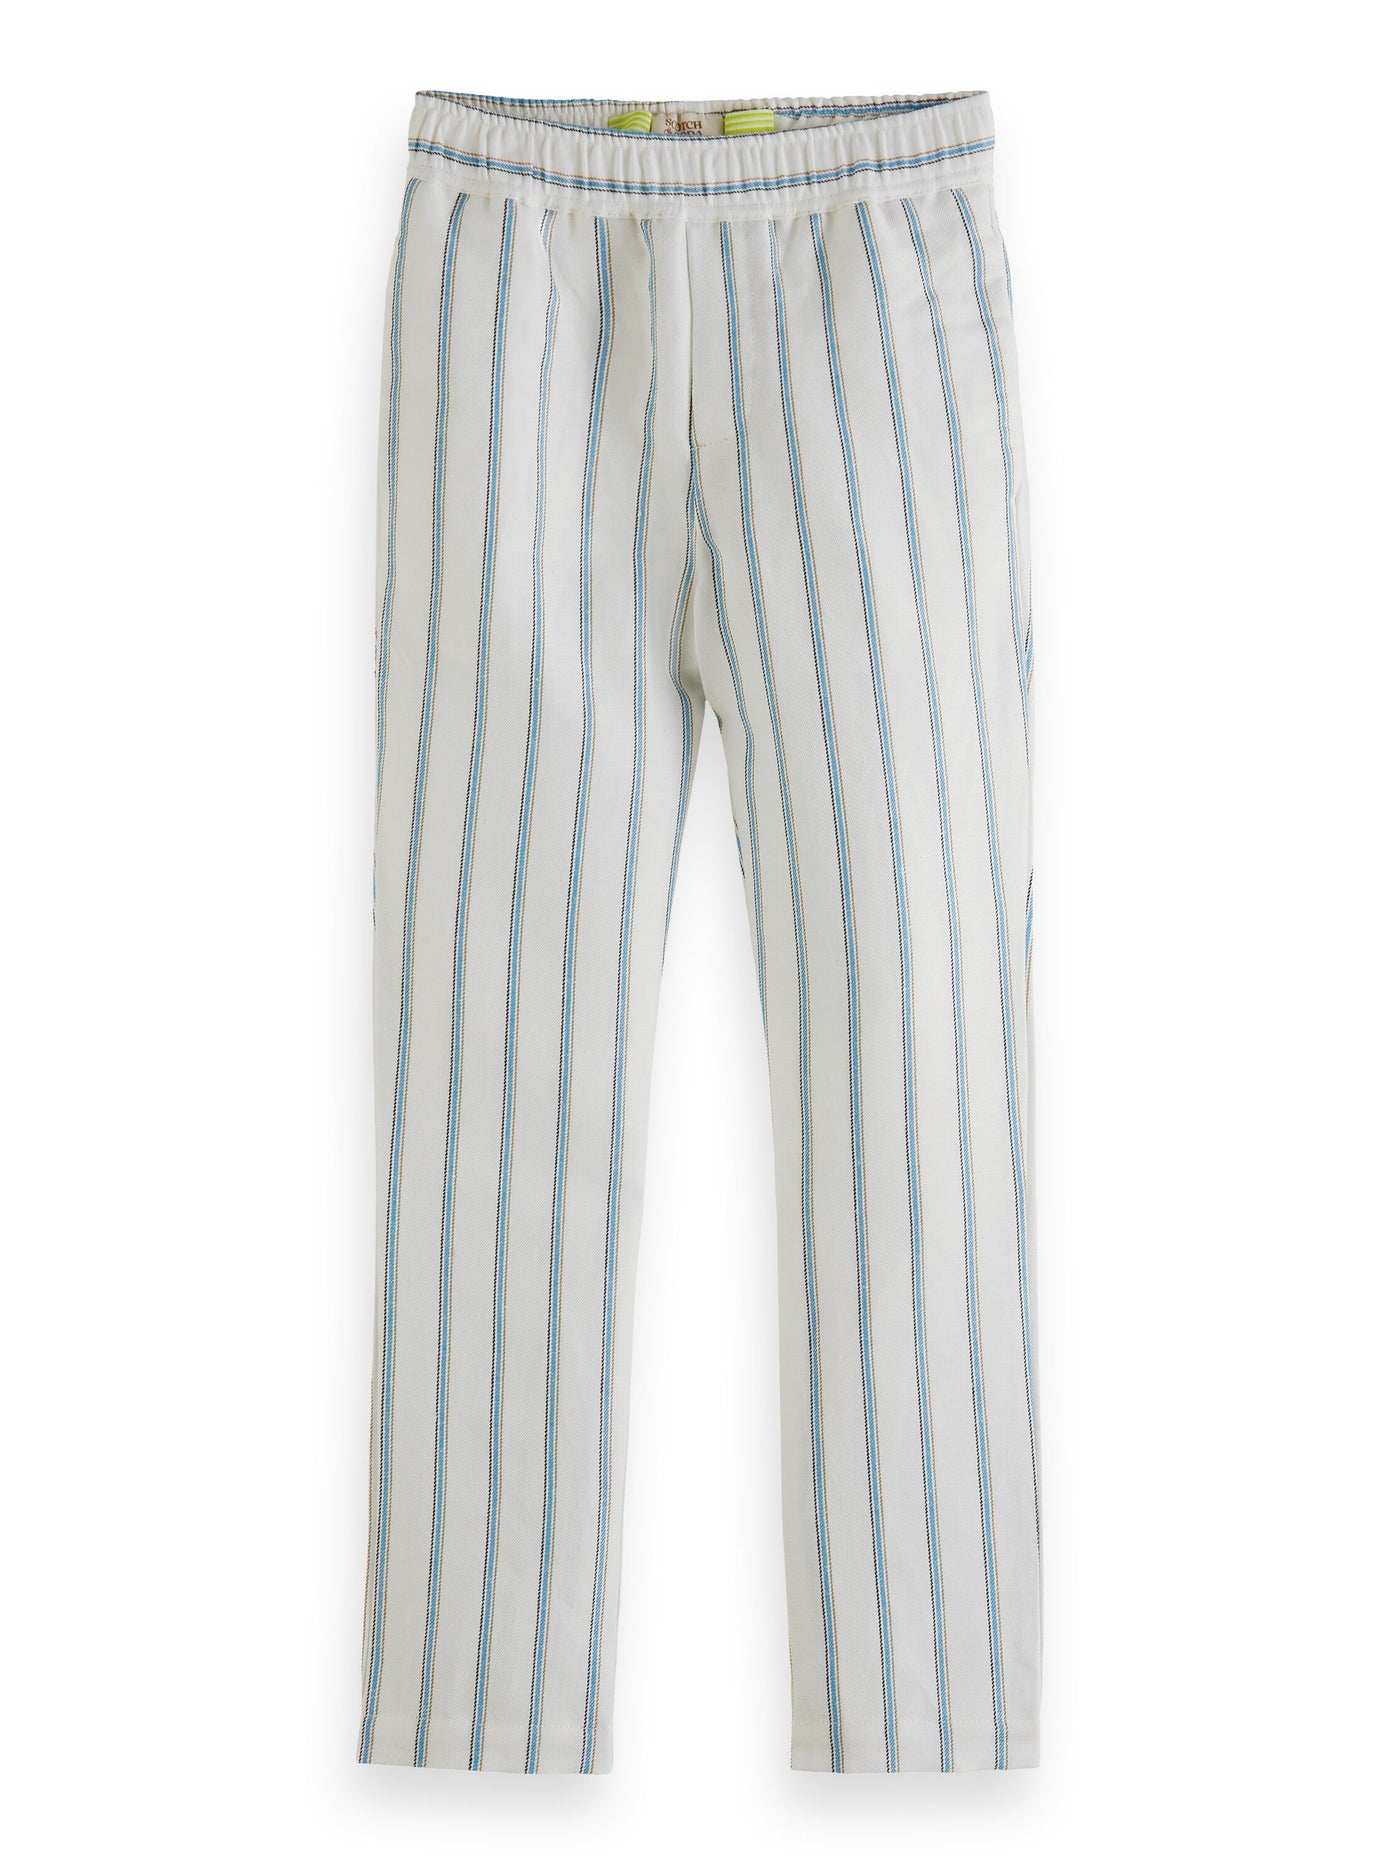 Relaxed Slim Fit Linen Pants